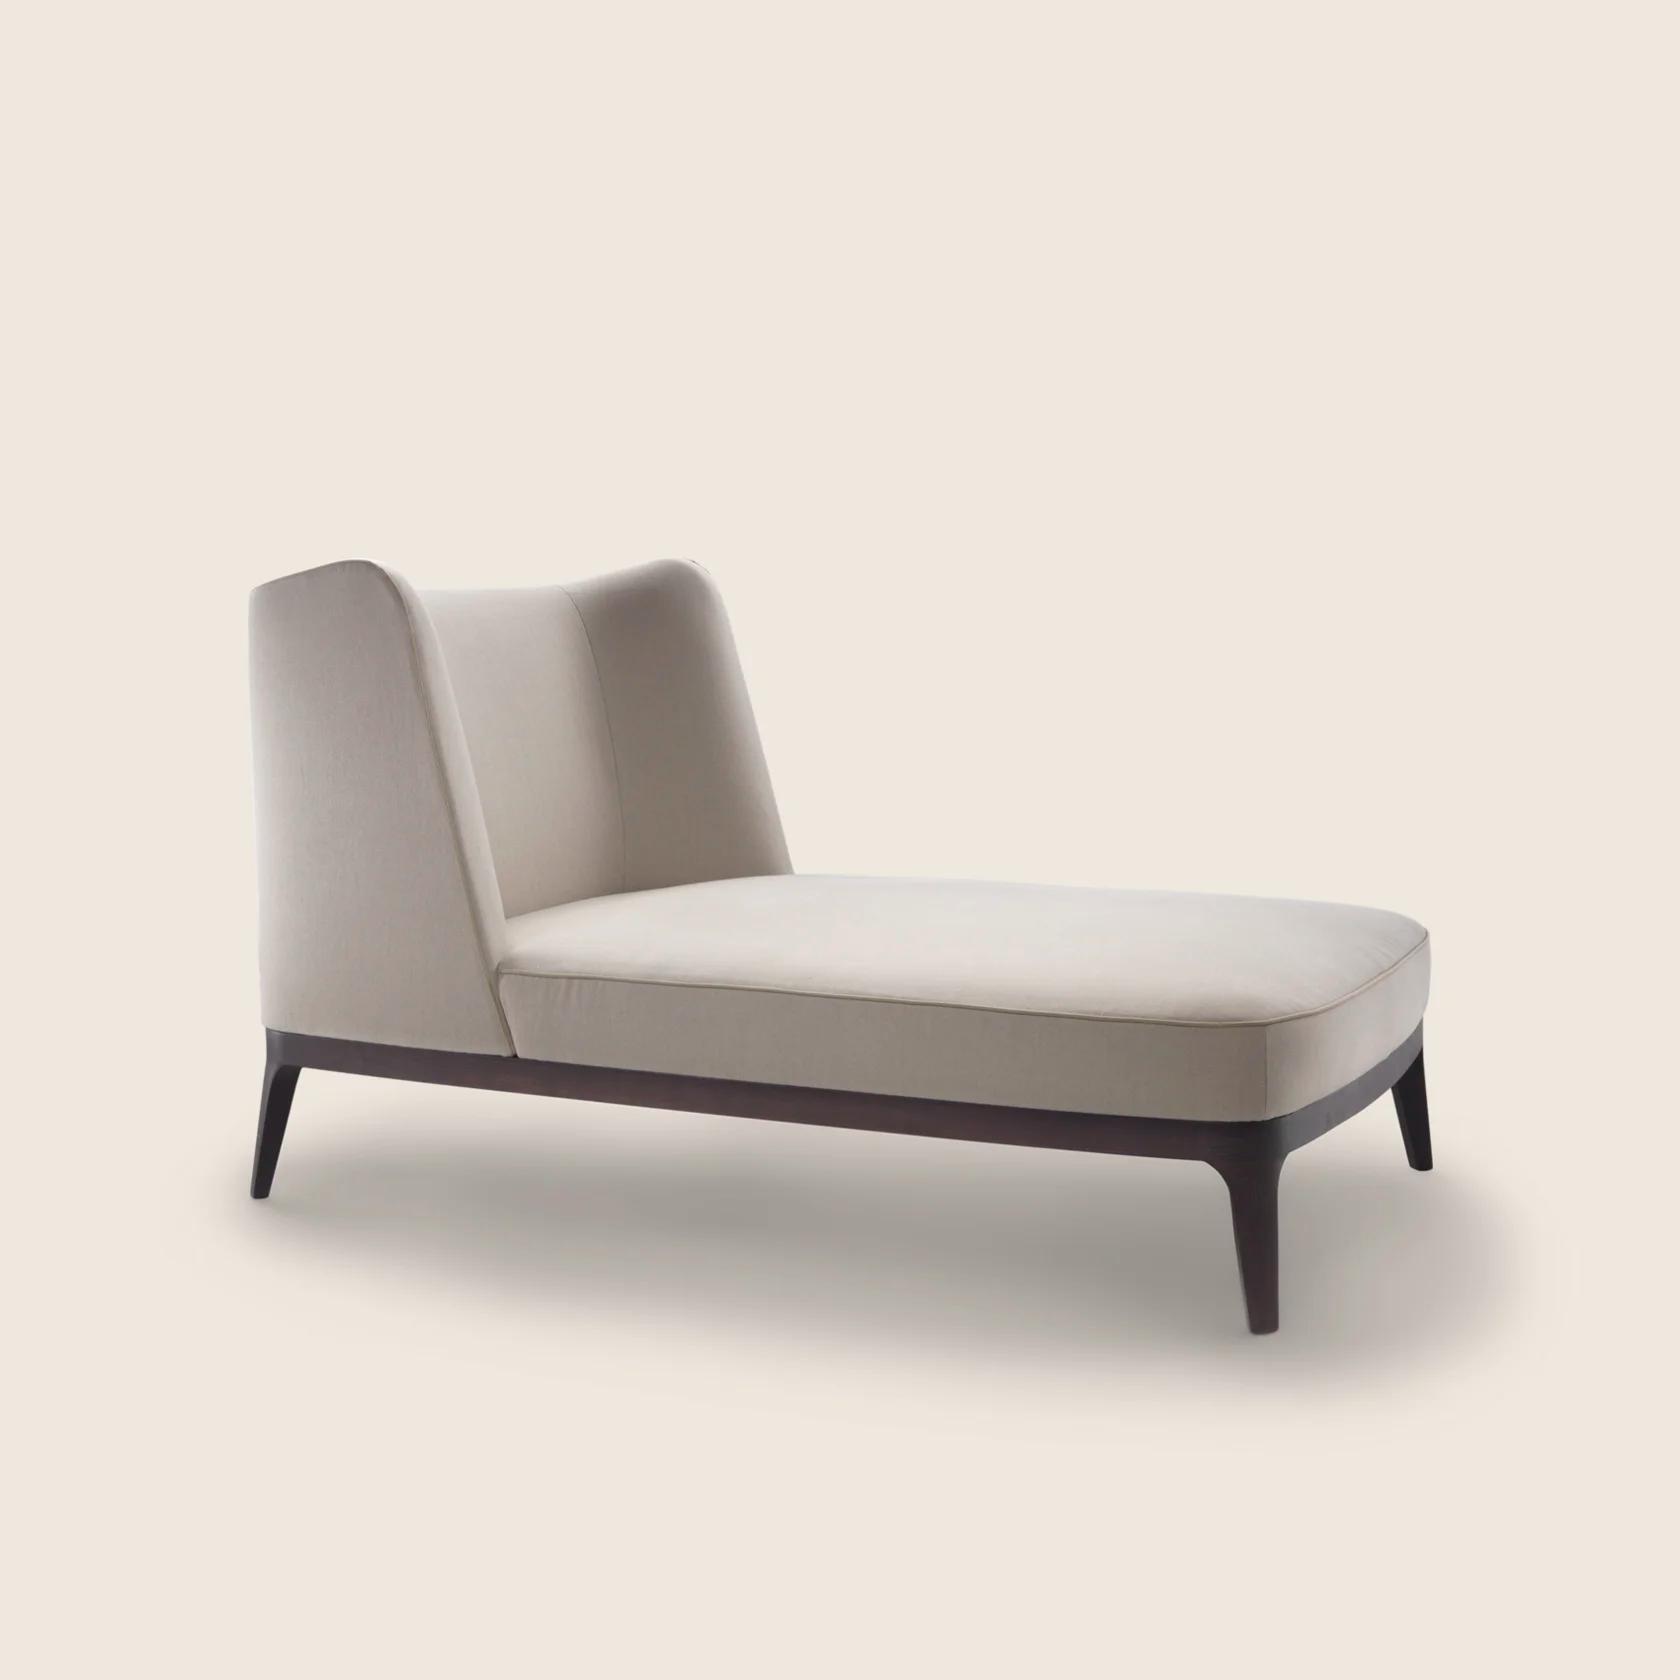 01I820_DRAGONFLY_CHAISELONGUE_02.png